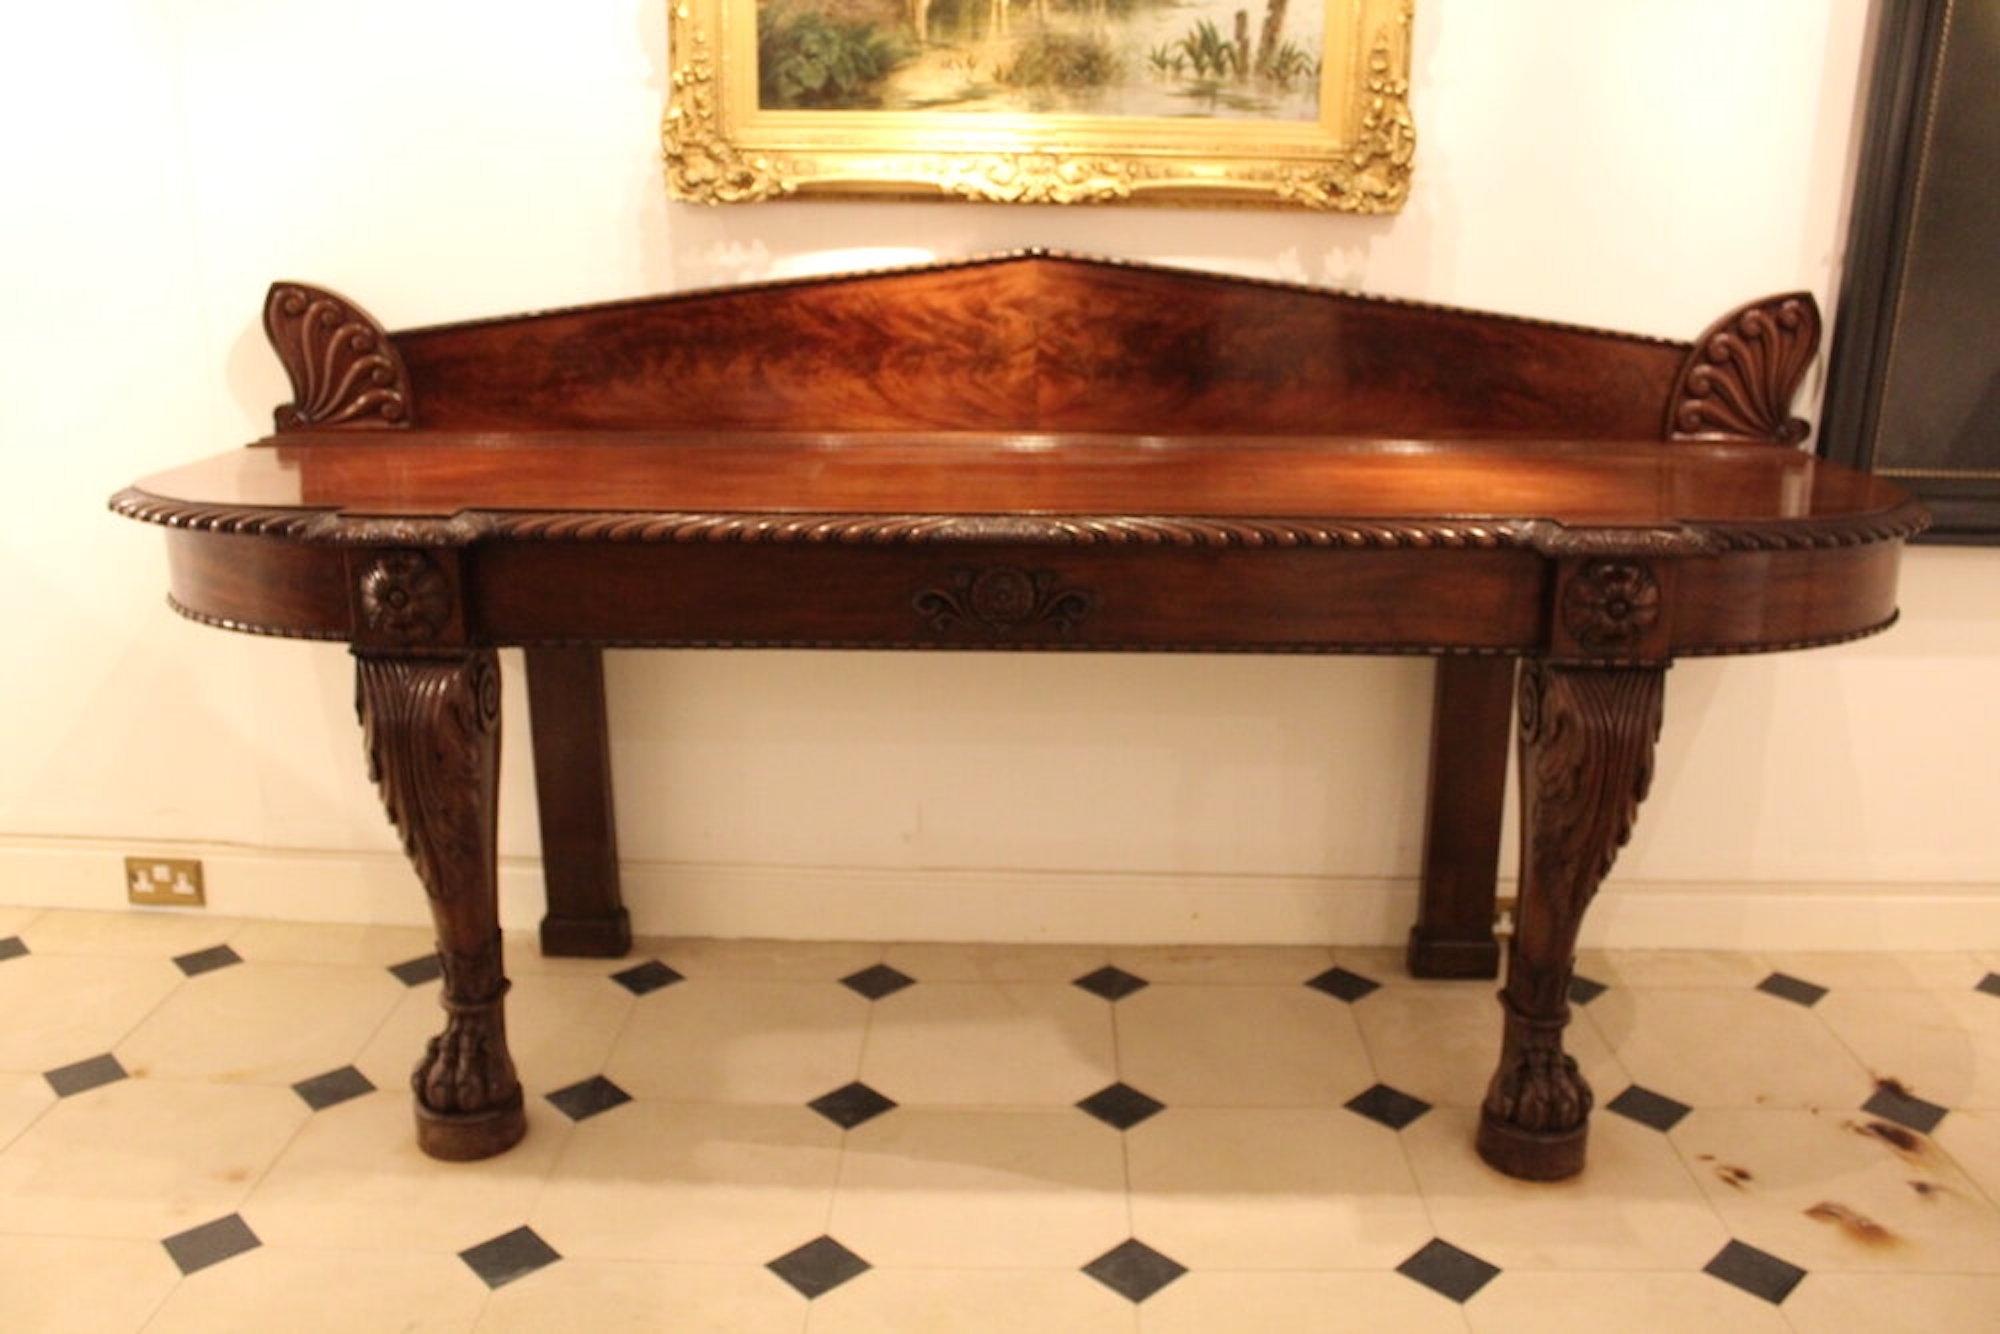 A high quality large scale mahogany serving table

A Large scale Mahogany serving table with heavily carved legs and feet possibly Irish. Circa 1840 in excellent original condition and colour.

Large shape and size 

Period: 19th